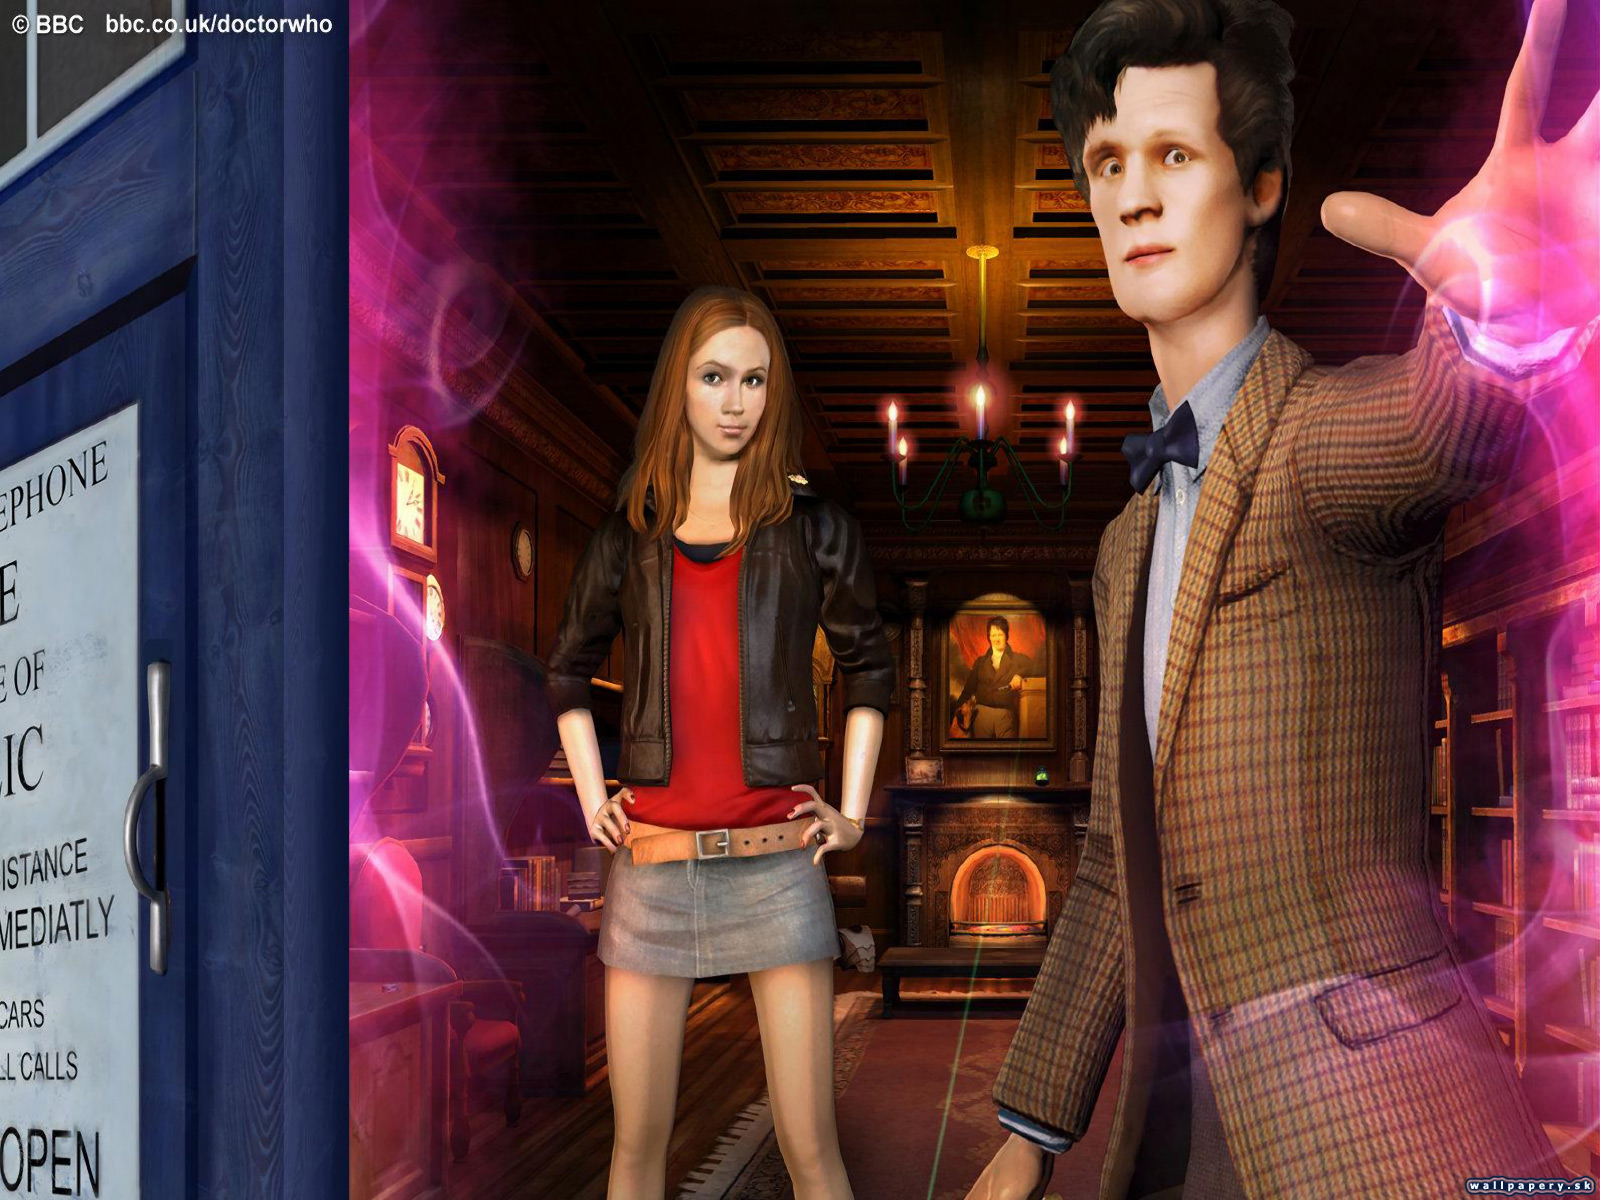 Doctor Who: The Adventure Games - TARDIS - wallpaper 2